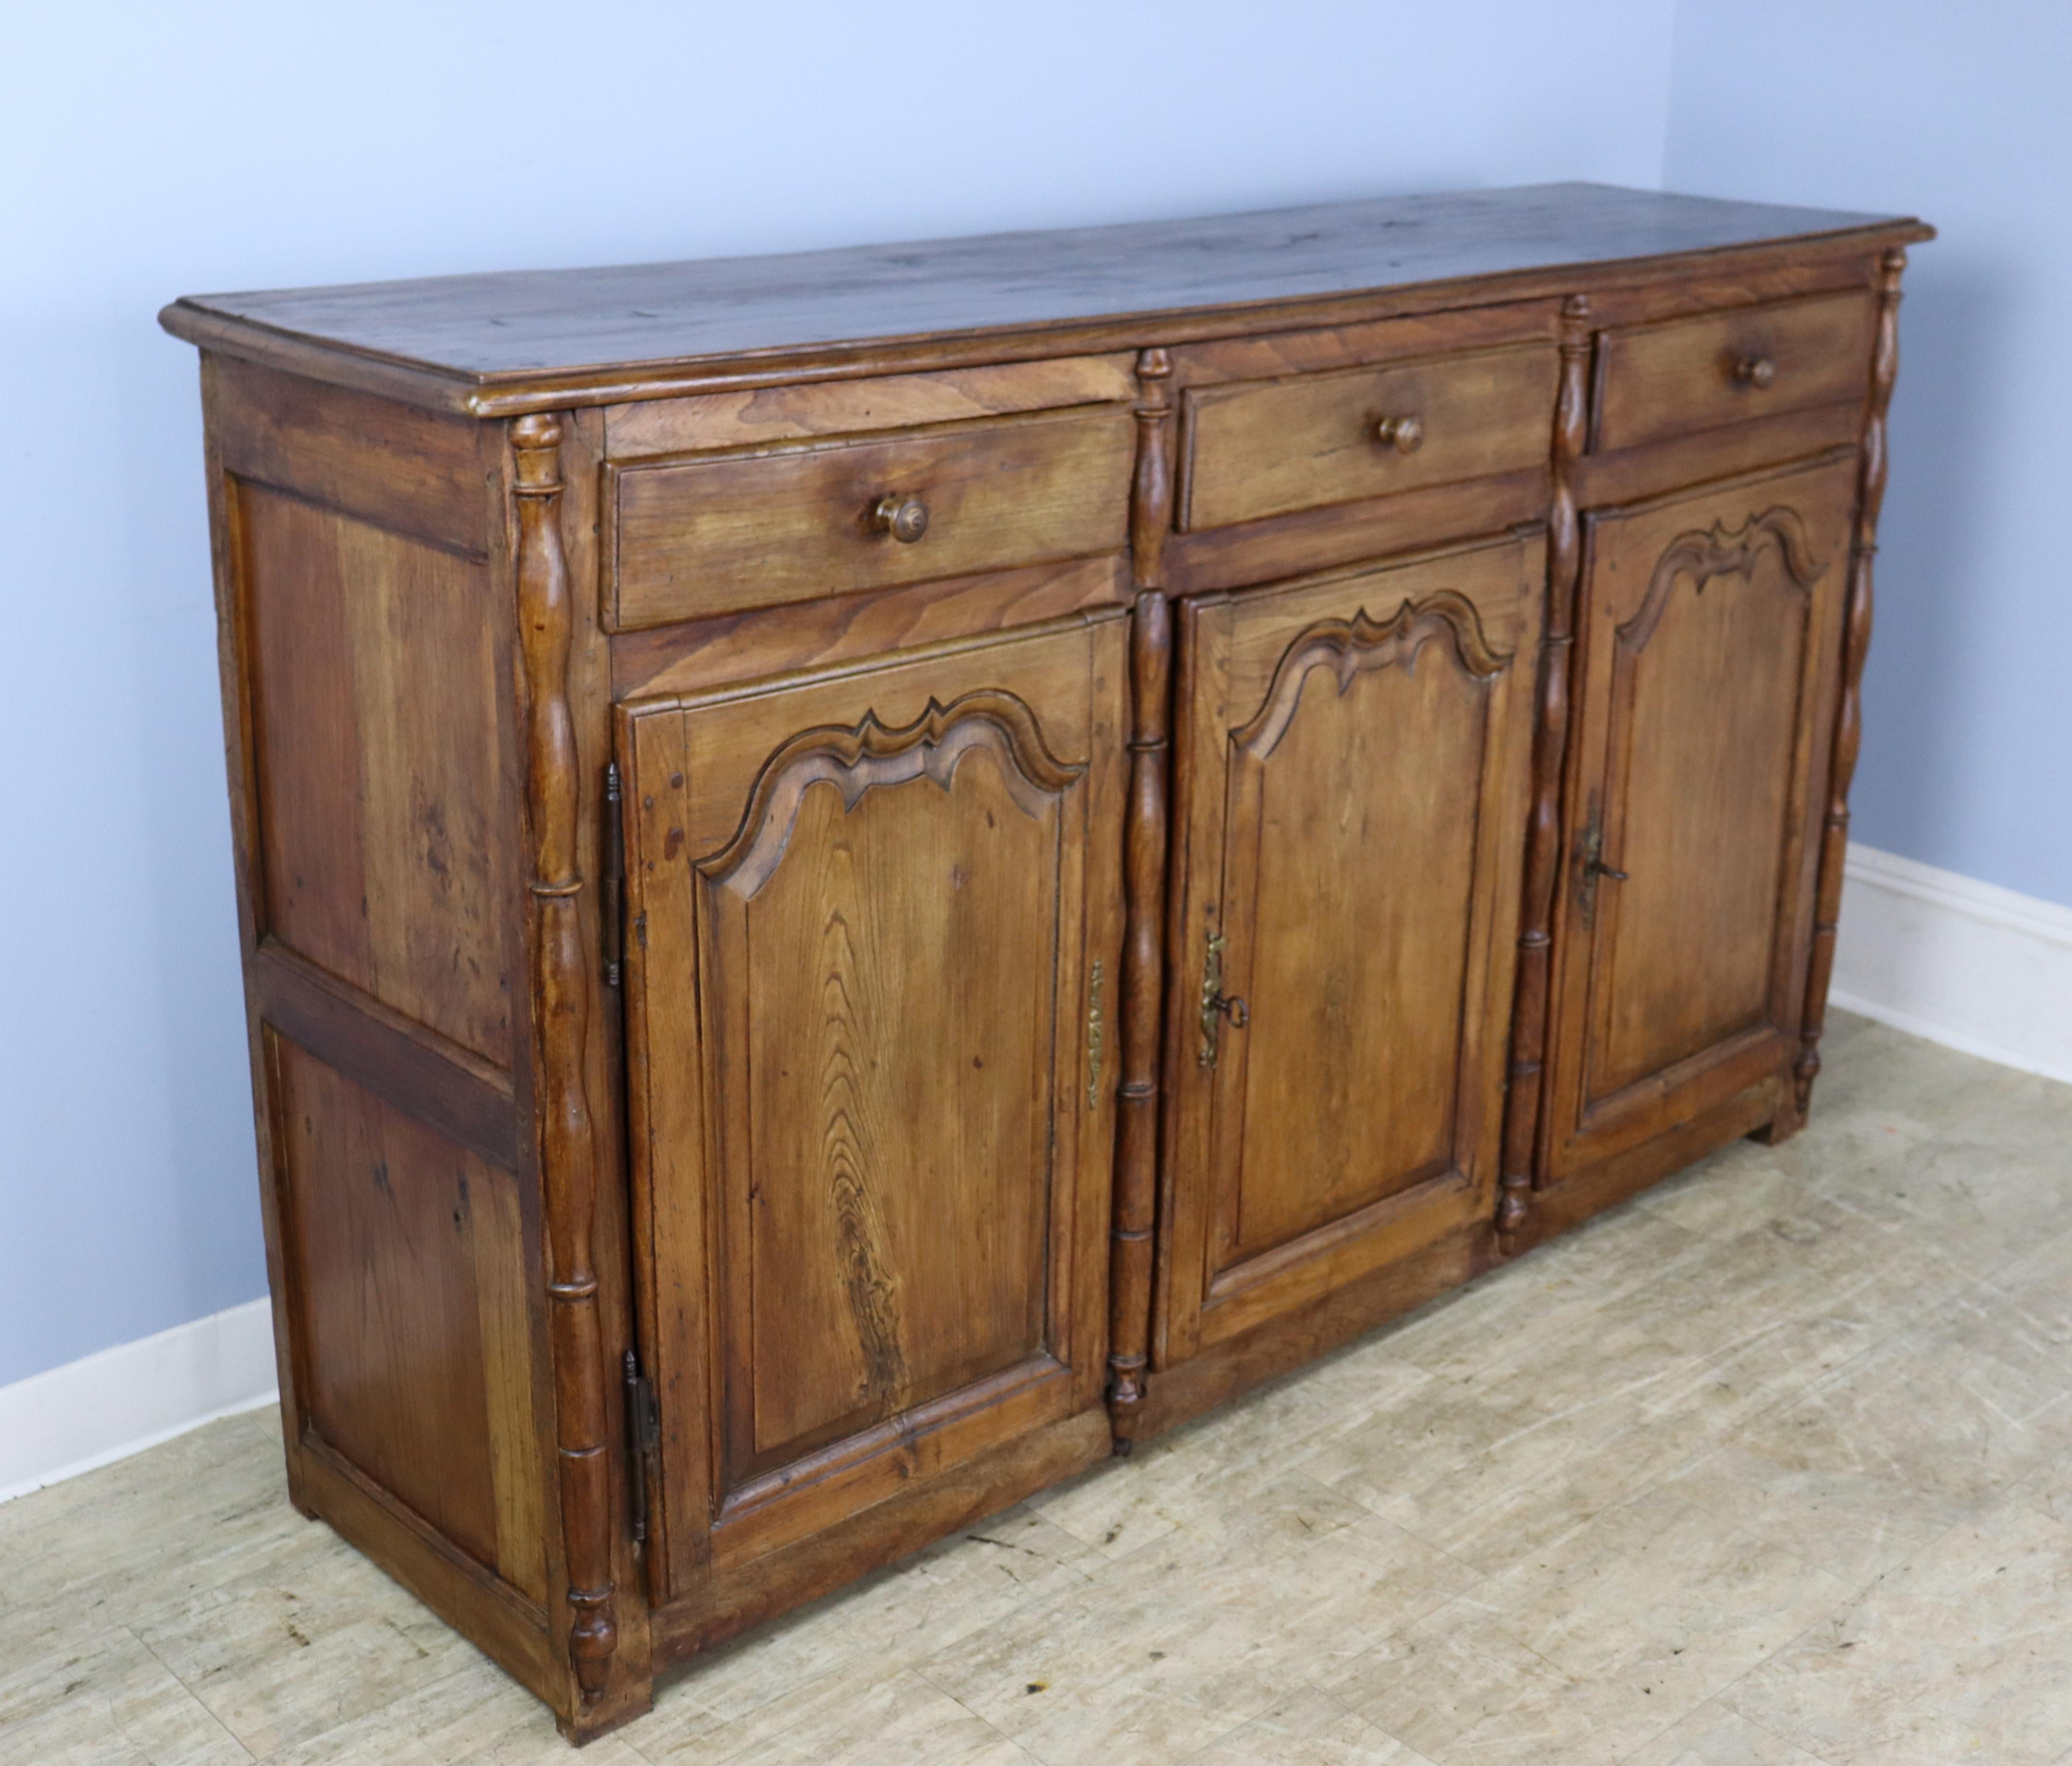 A large French chestnut buffet or enfilade, grand in both scale and sensibility. Carved detail on both the door panels and the drawers and column details to complete the look. The interior and the top are both clean and in good condition. There are